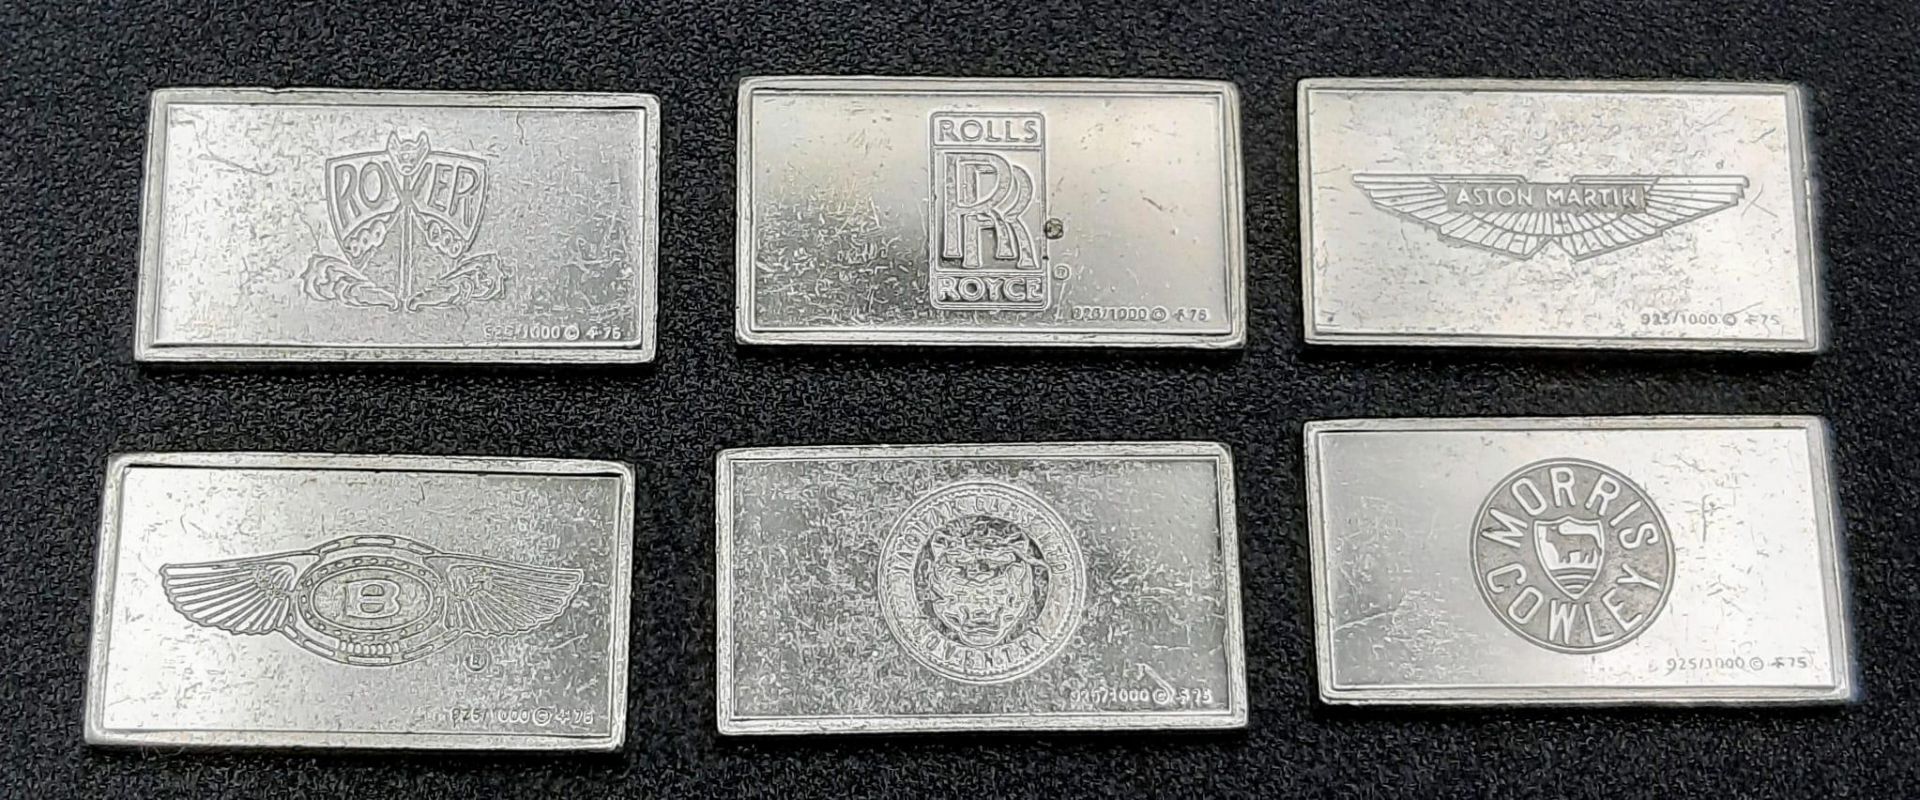 A SELECTION OF 6 BEST BRITISH CAR MANUFACTURERS MINI PLAQUES WITH LOGO AND CARS AND DATES. BRANDS TO - Image 2 of 3